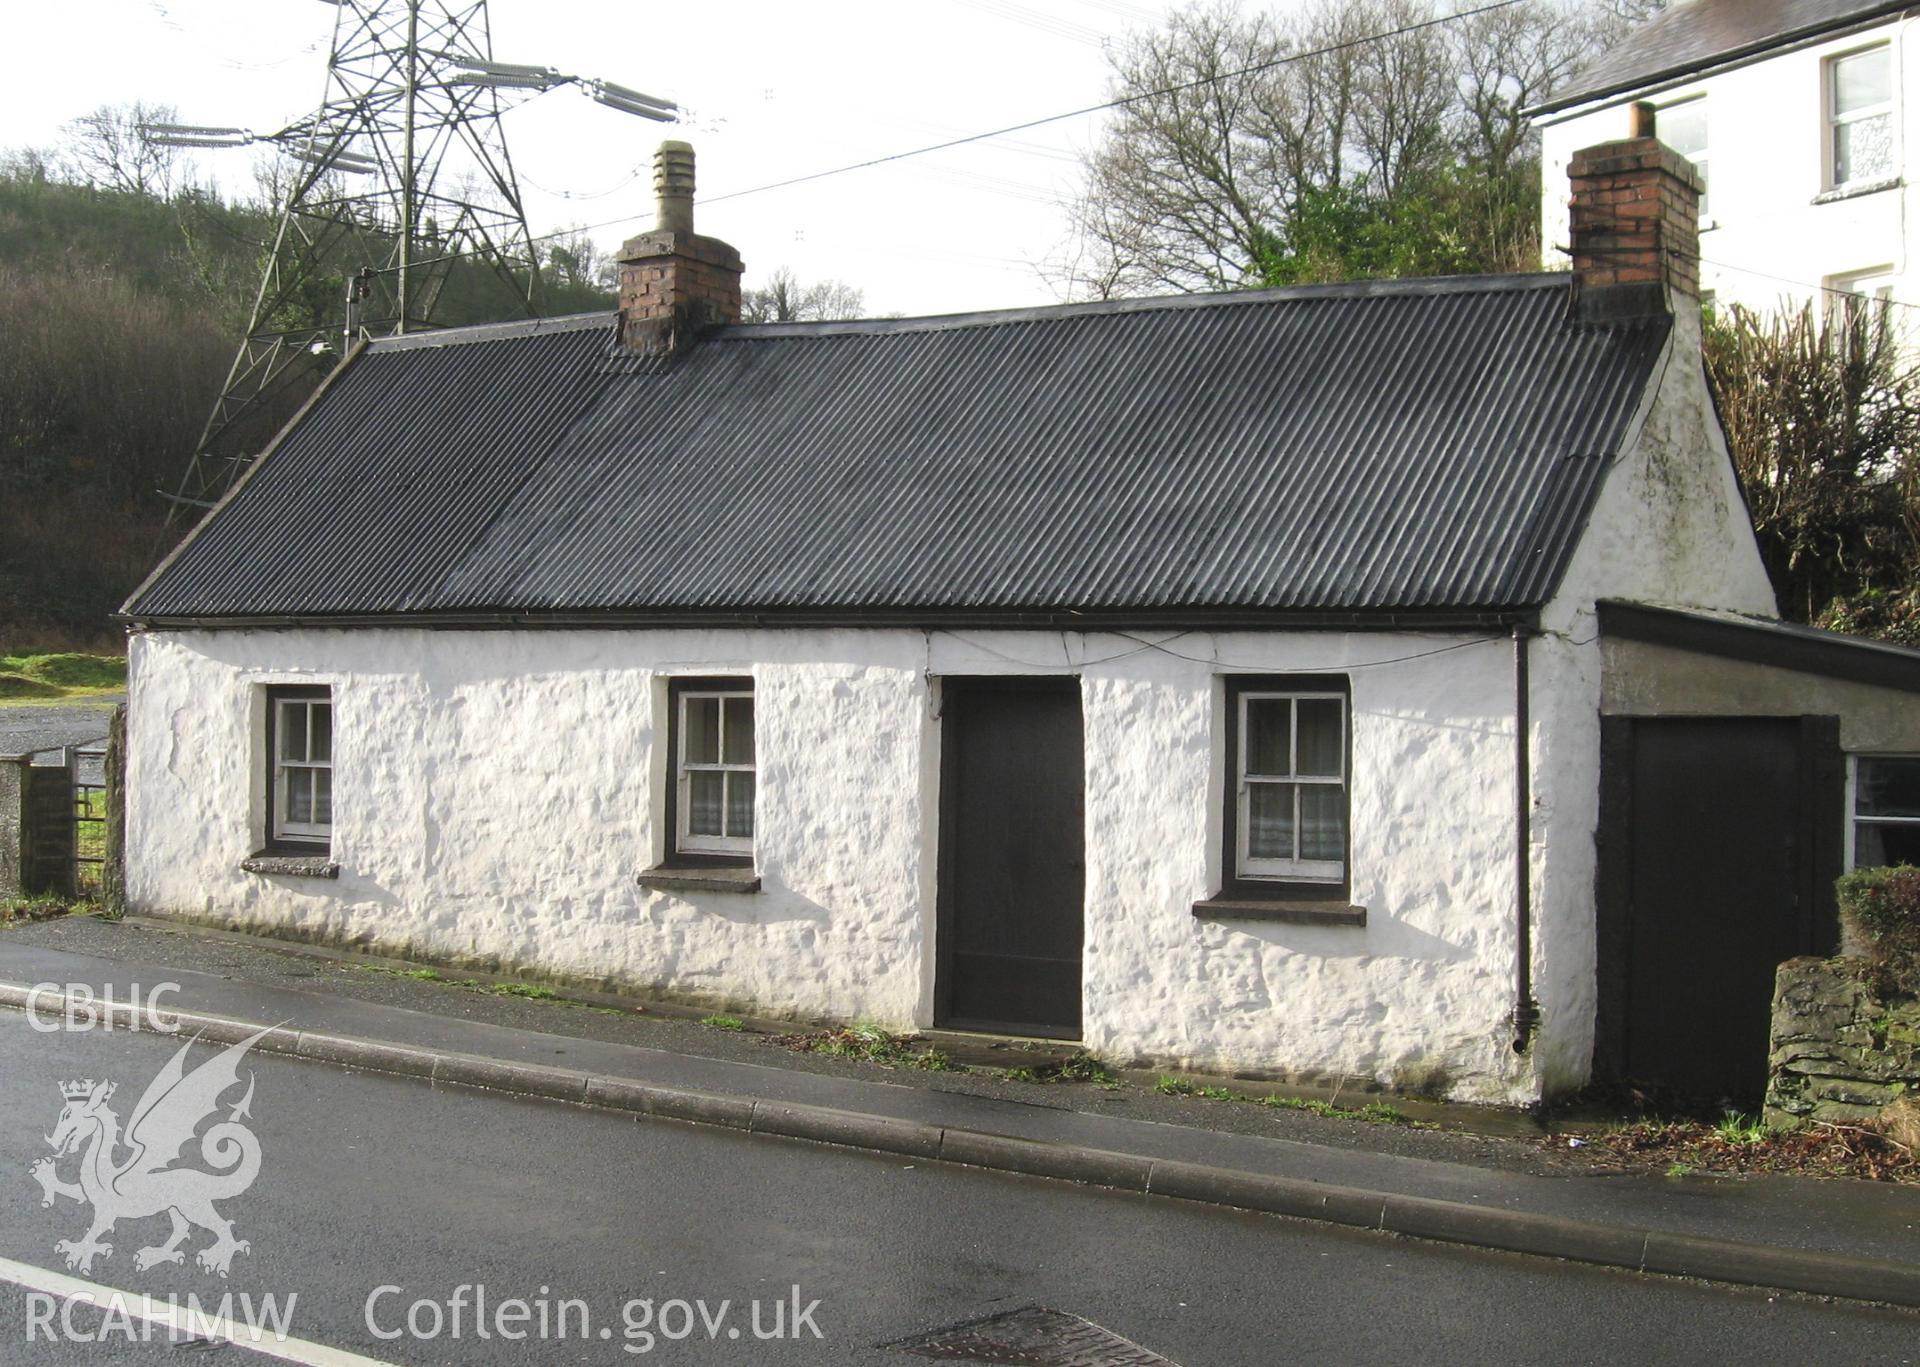 Colour photo showing Talfan Cottage, Llanddowror, taken by Paul R. Davis and dated 1st January 1980.